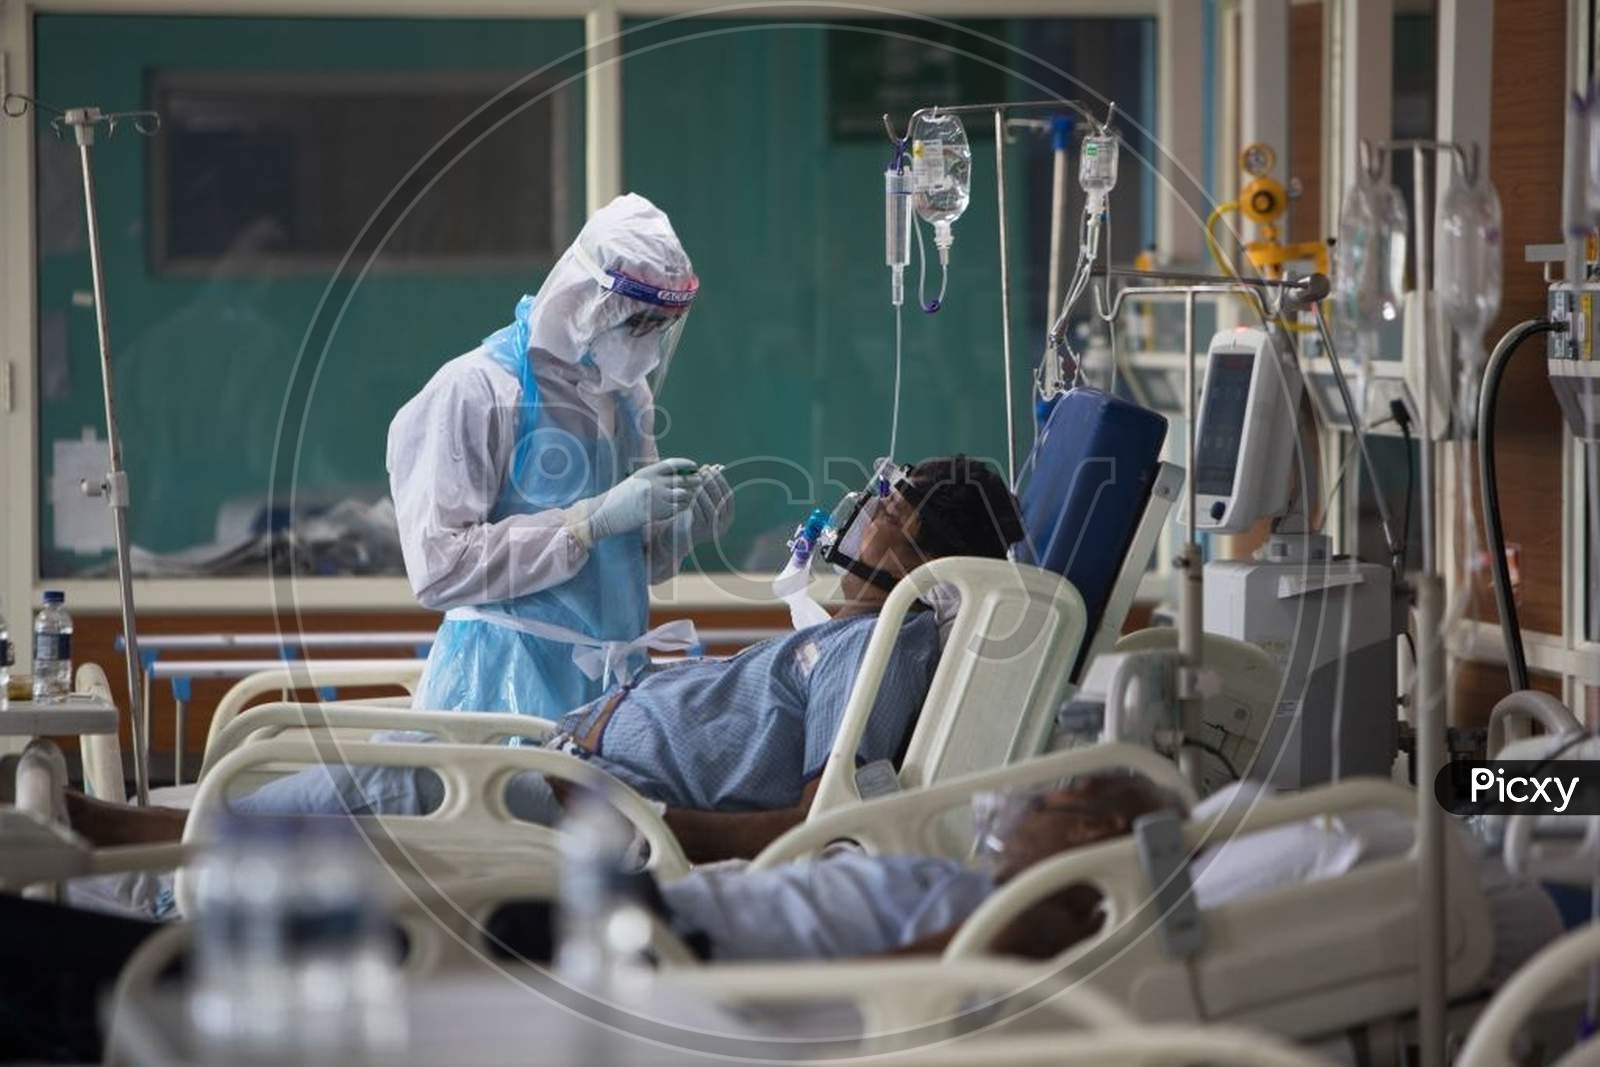 A Medical Staff Wearing Personal Protective Equipment (Ppe) Suit Looks After A Covid-19 Coronavirus Patient At The Intensive Care Unit Of The Sharda Hospital, In Greater Noida On July 15, 2020